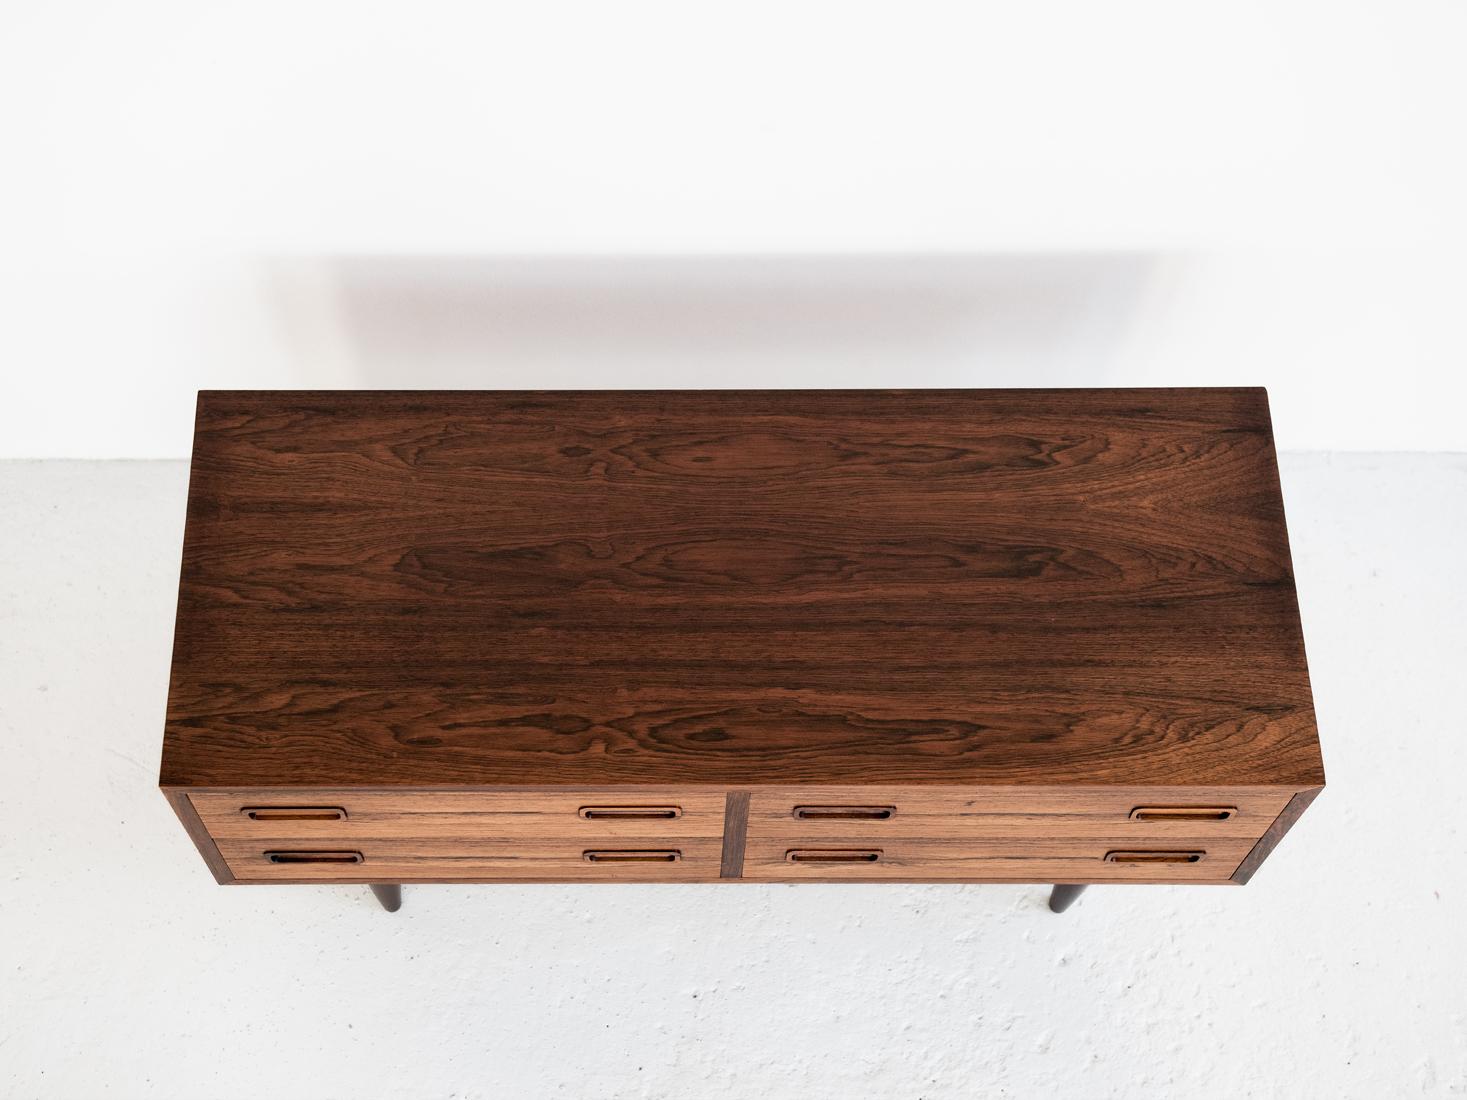 Midcentury Danish Chest of 2x2 Drawers in Rosewood by Hundevad, 1960s For Sale 3